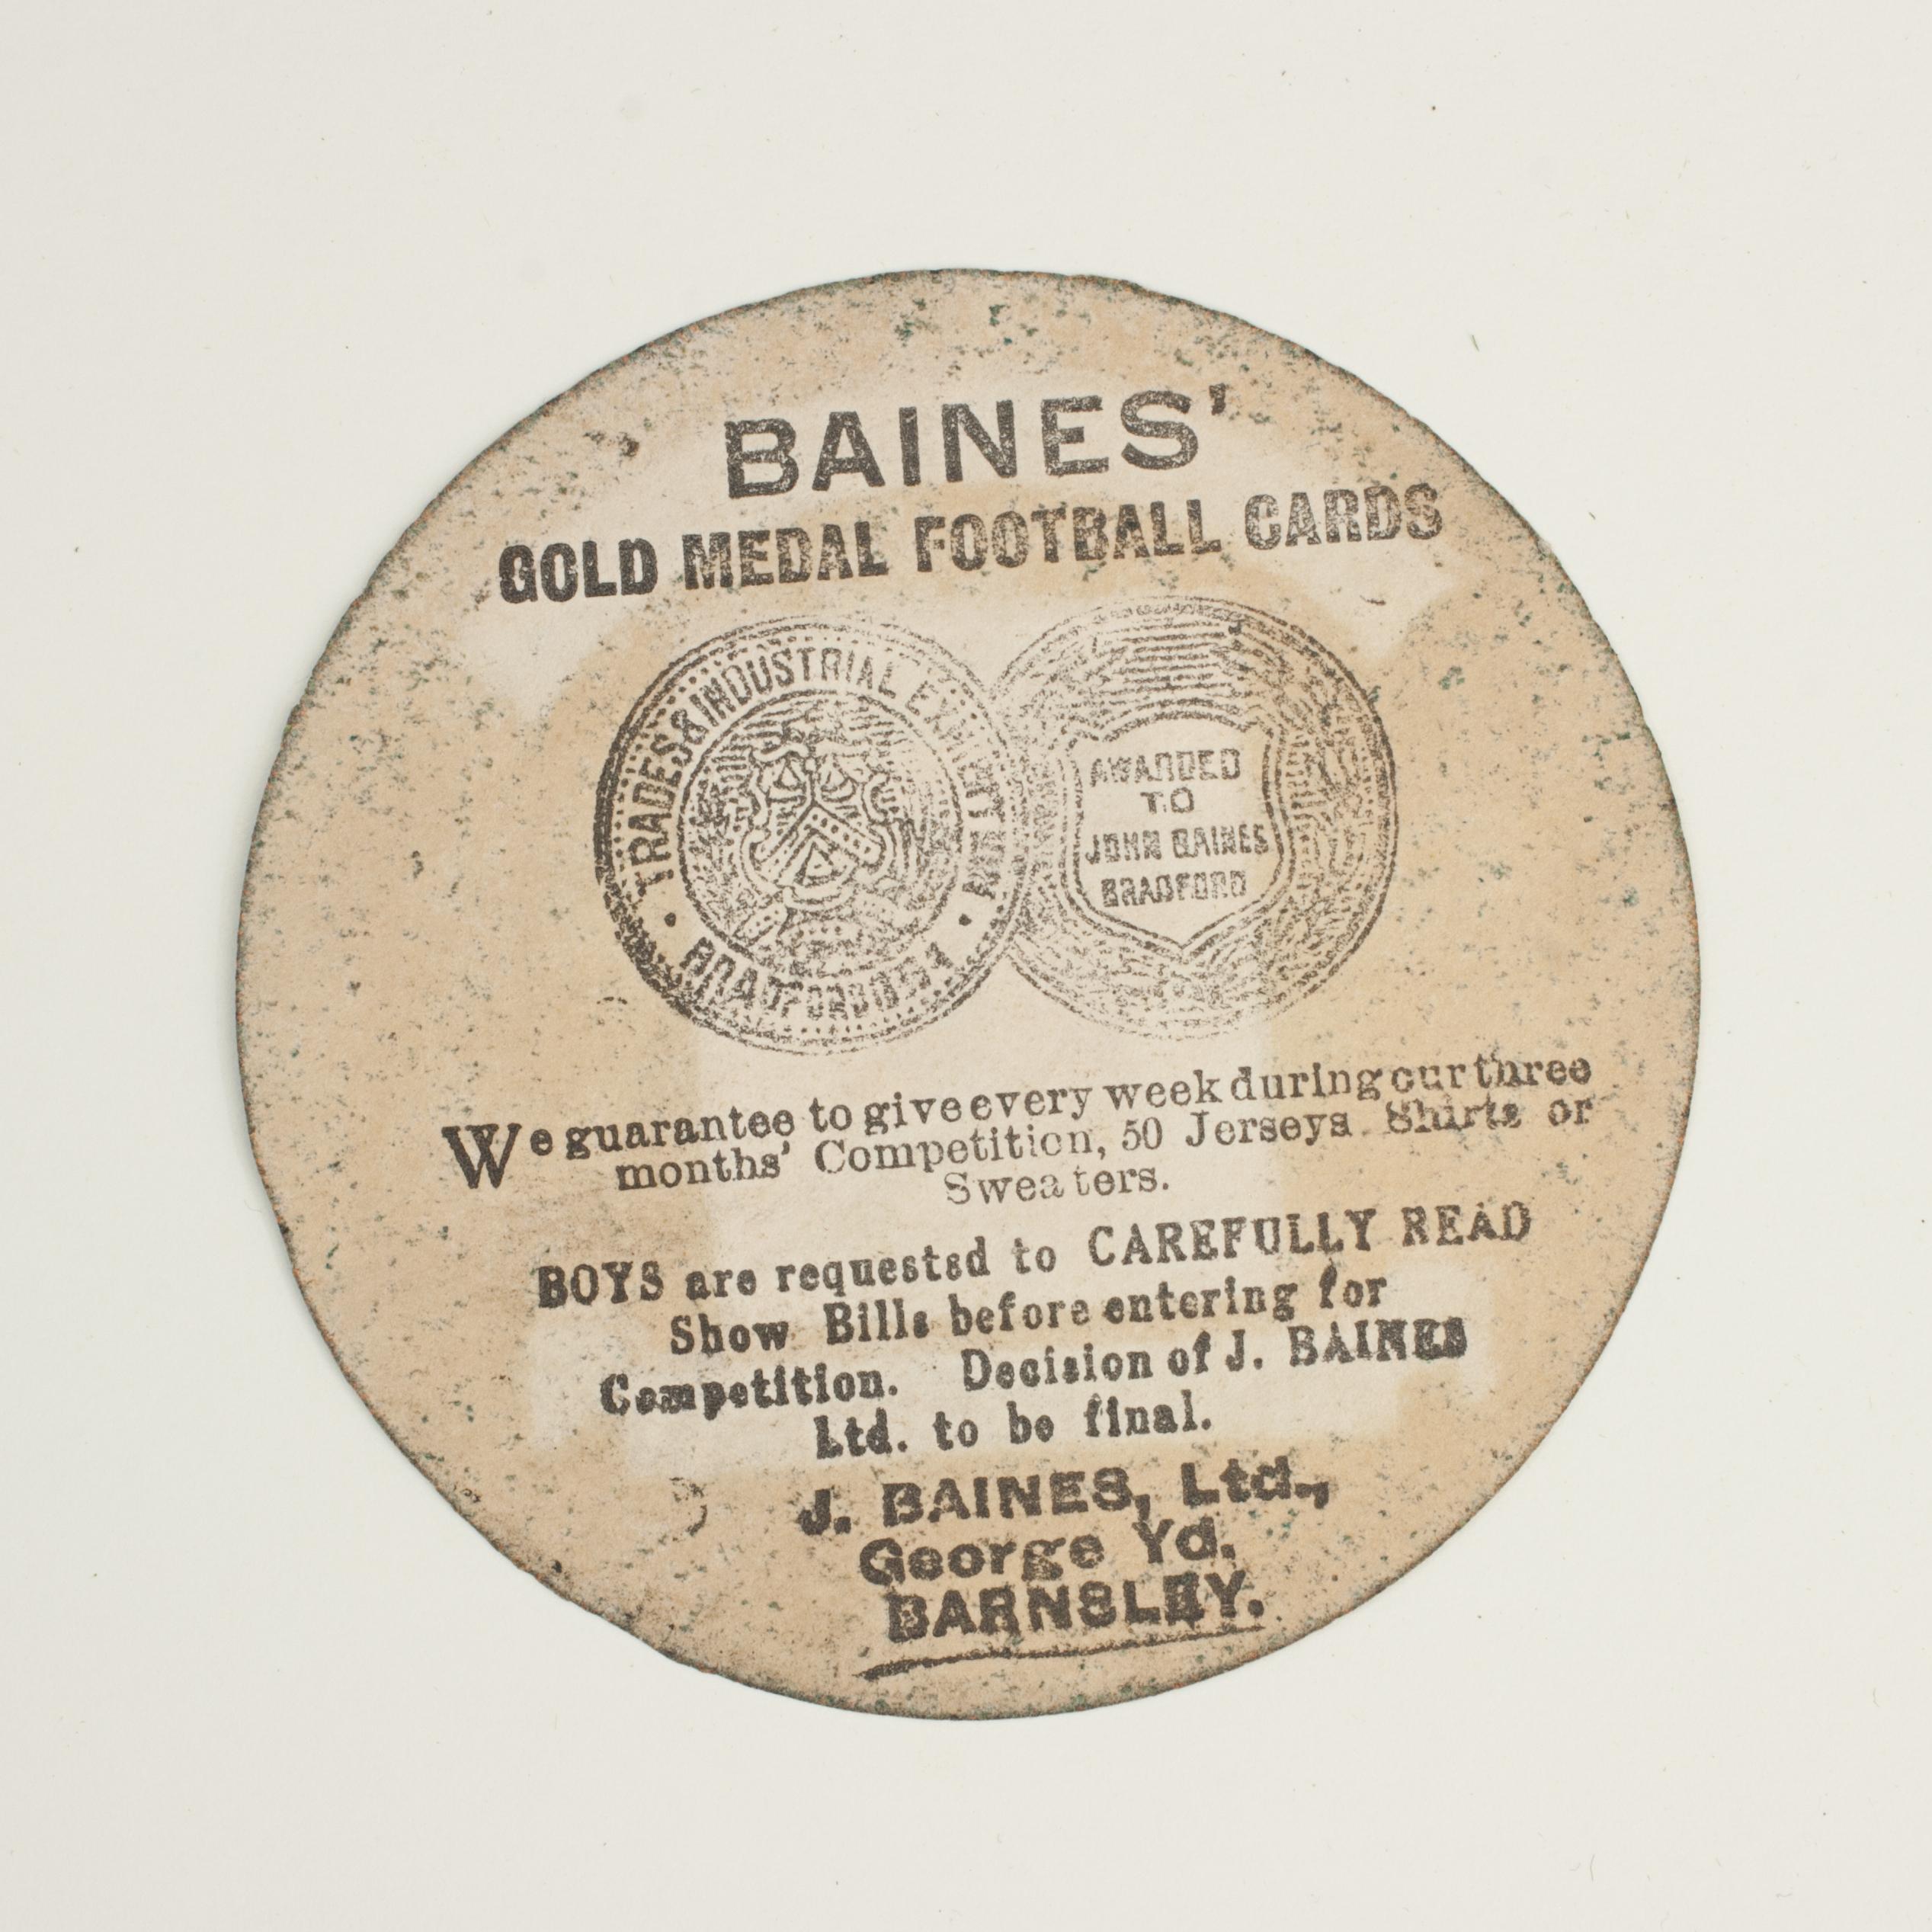 Baines Football trade card, Middlesbro. Well Played.
A rare circular football trade card in the shape of a leather football ball. Made by the toy shop owner from Bradford, John Baines. Baines went on to produce not only football cards but